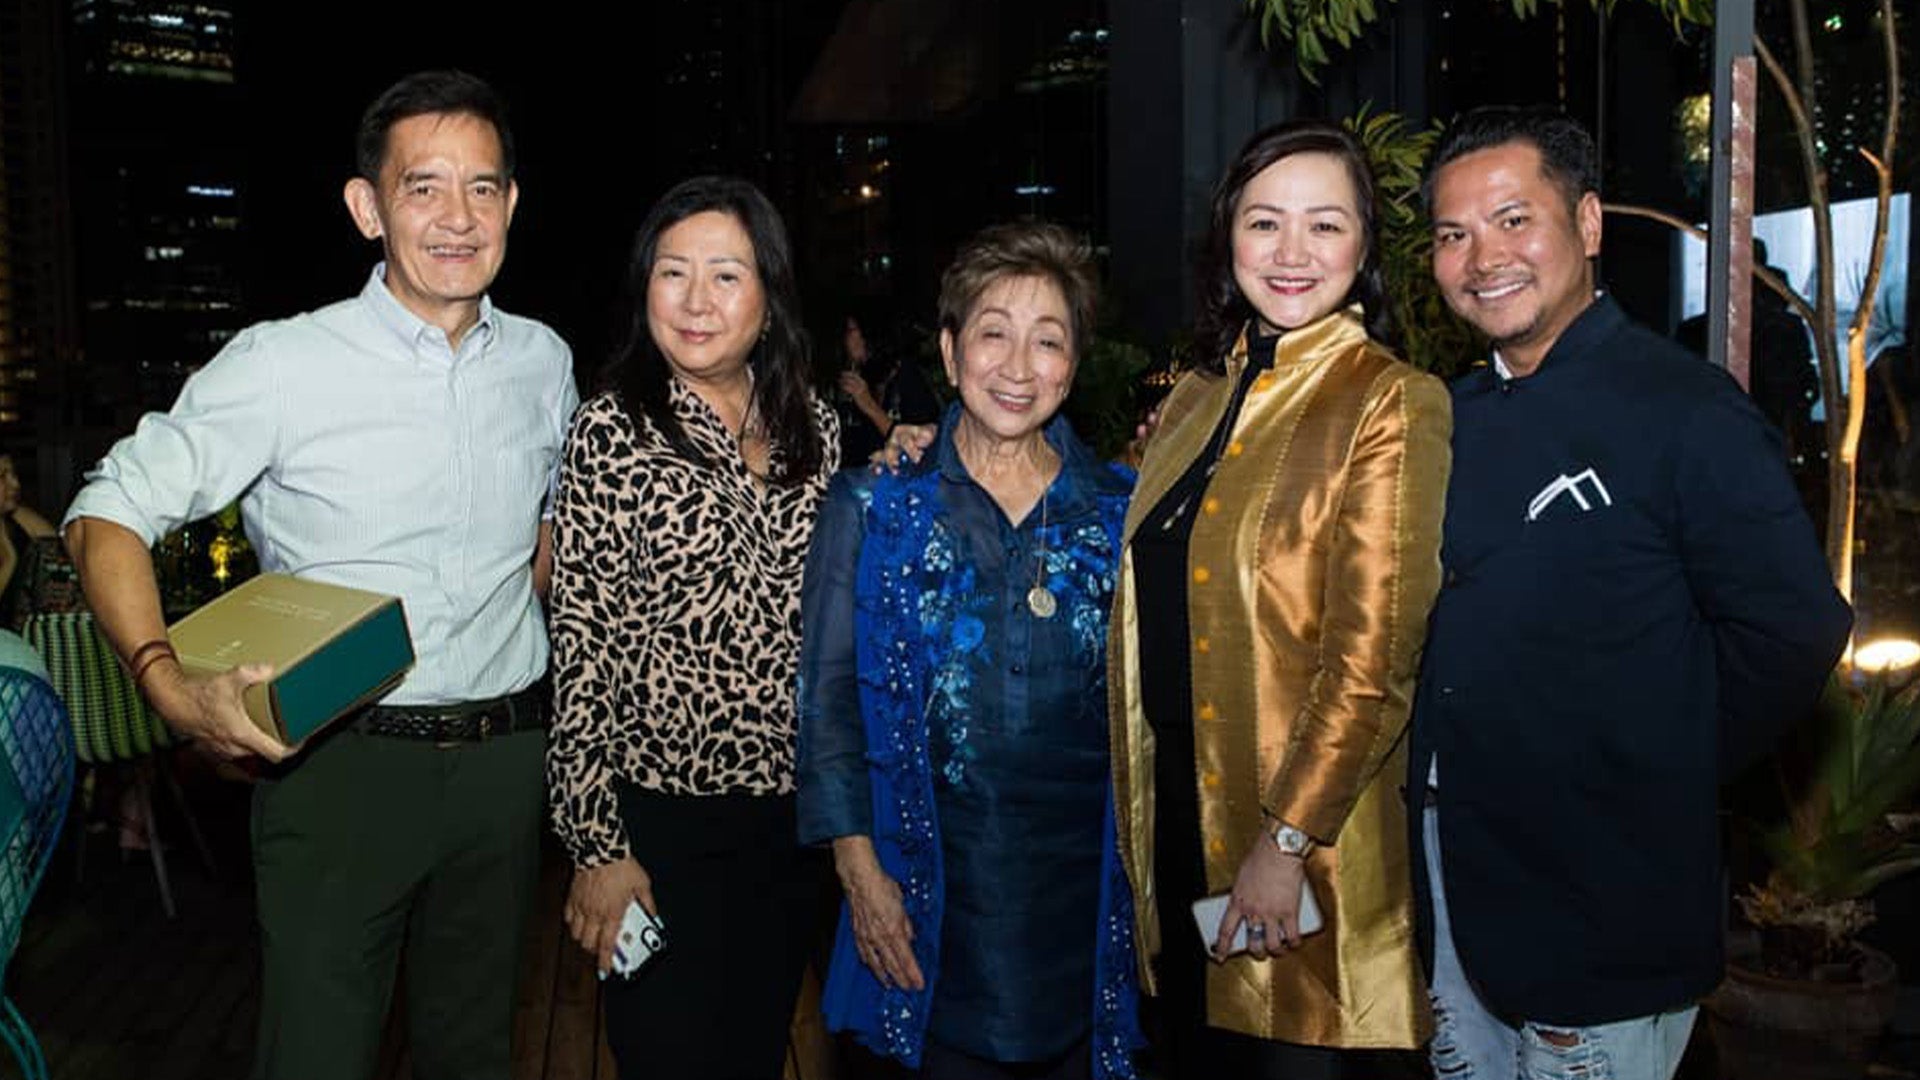 Pili Ani founders Rosalina Tan and Mary Jane Tan Ong with friends